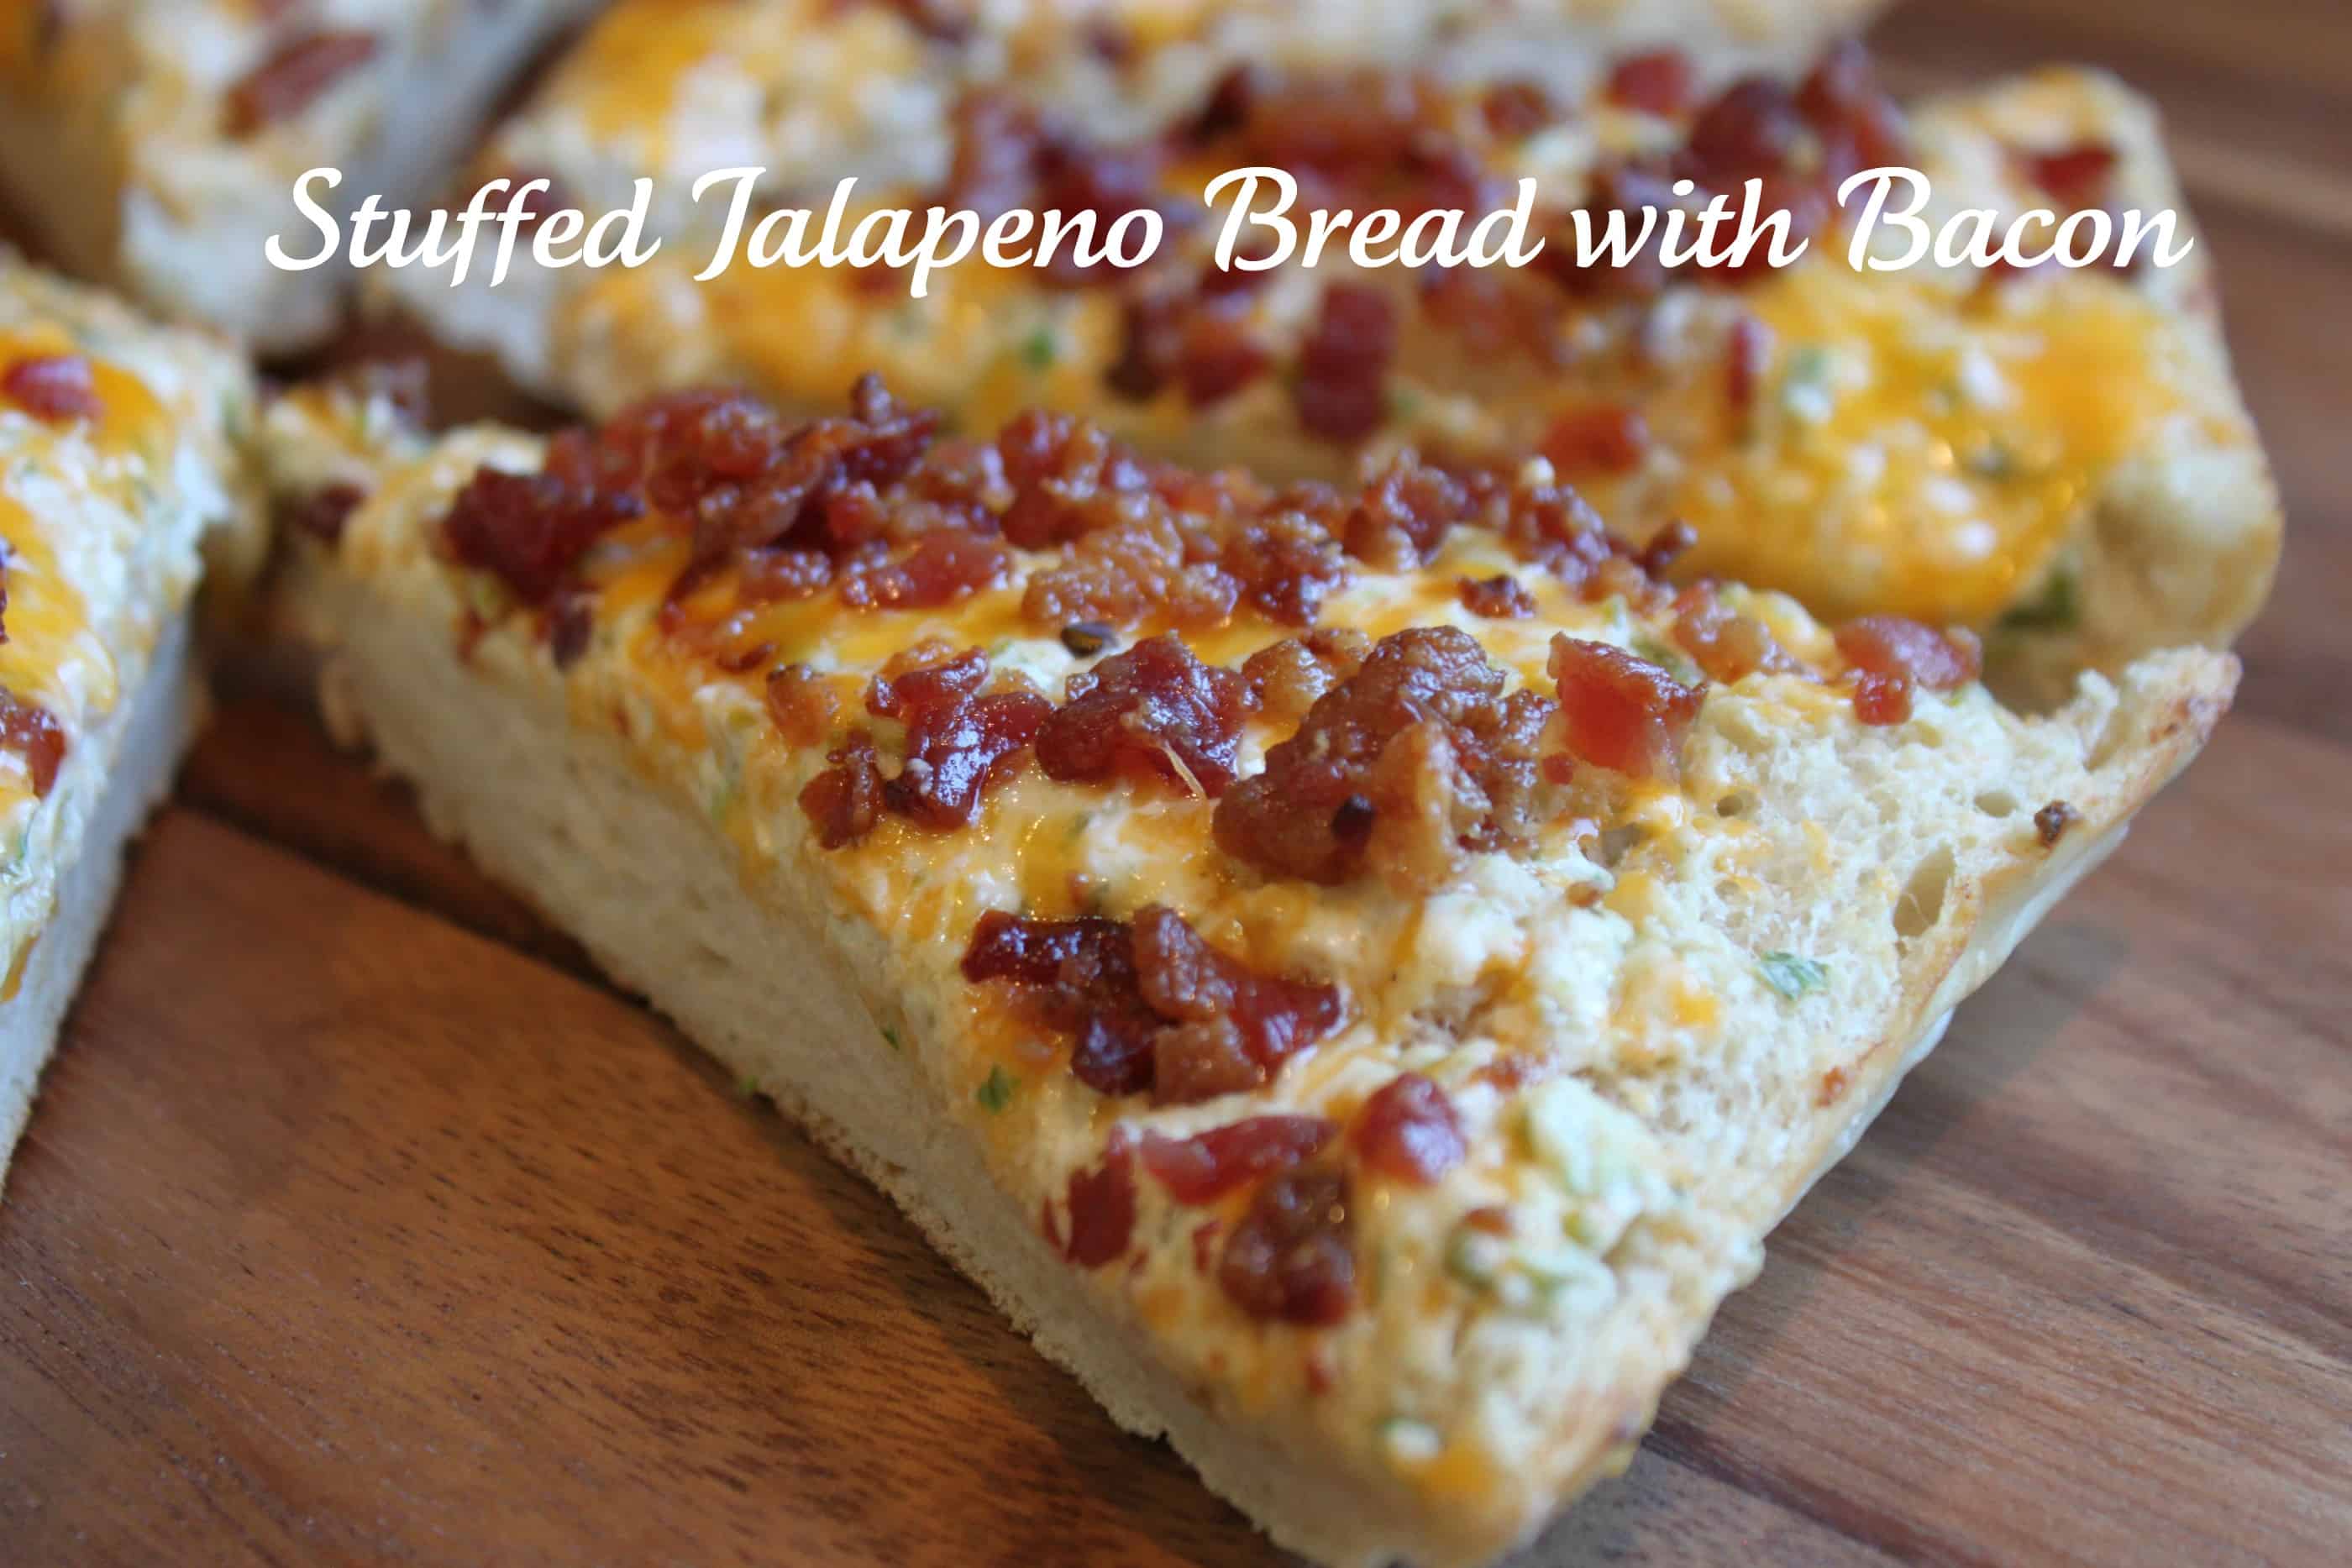 Stuffed Jalapeno Bread with Bacon